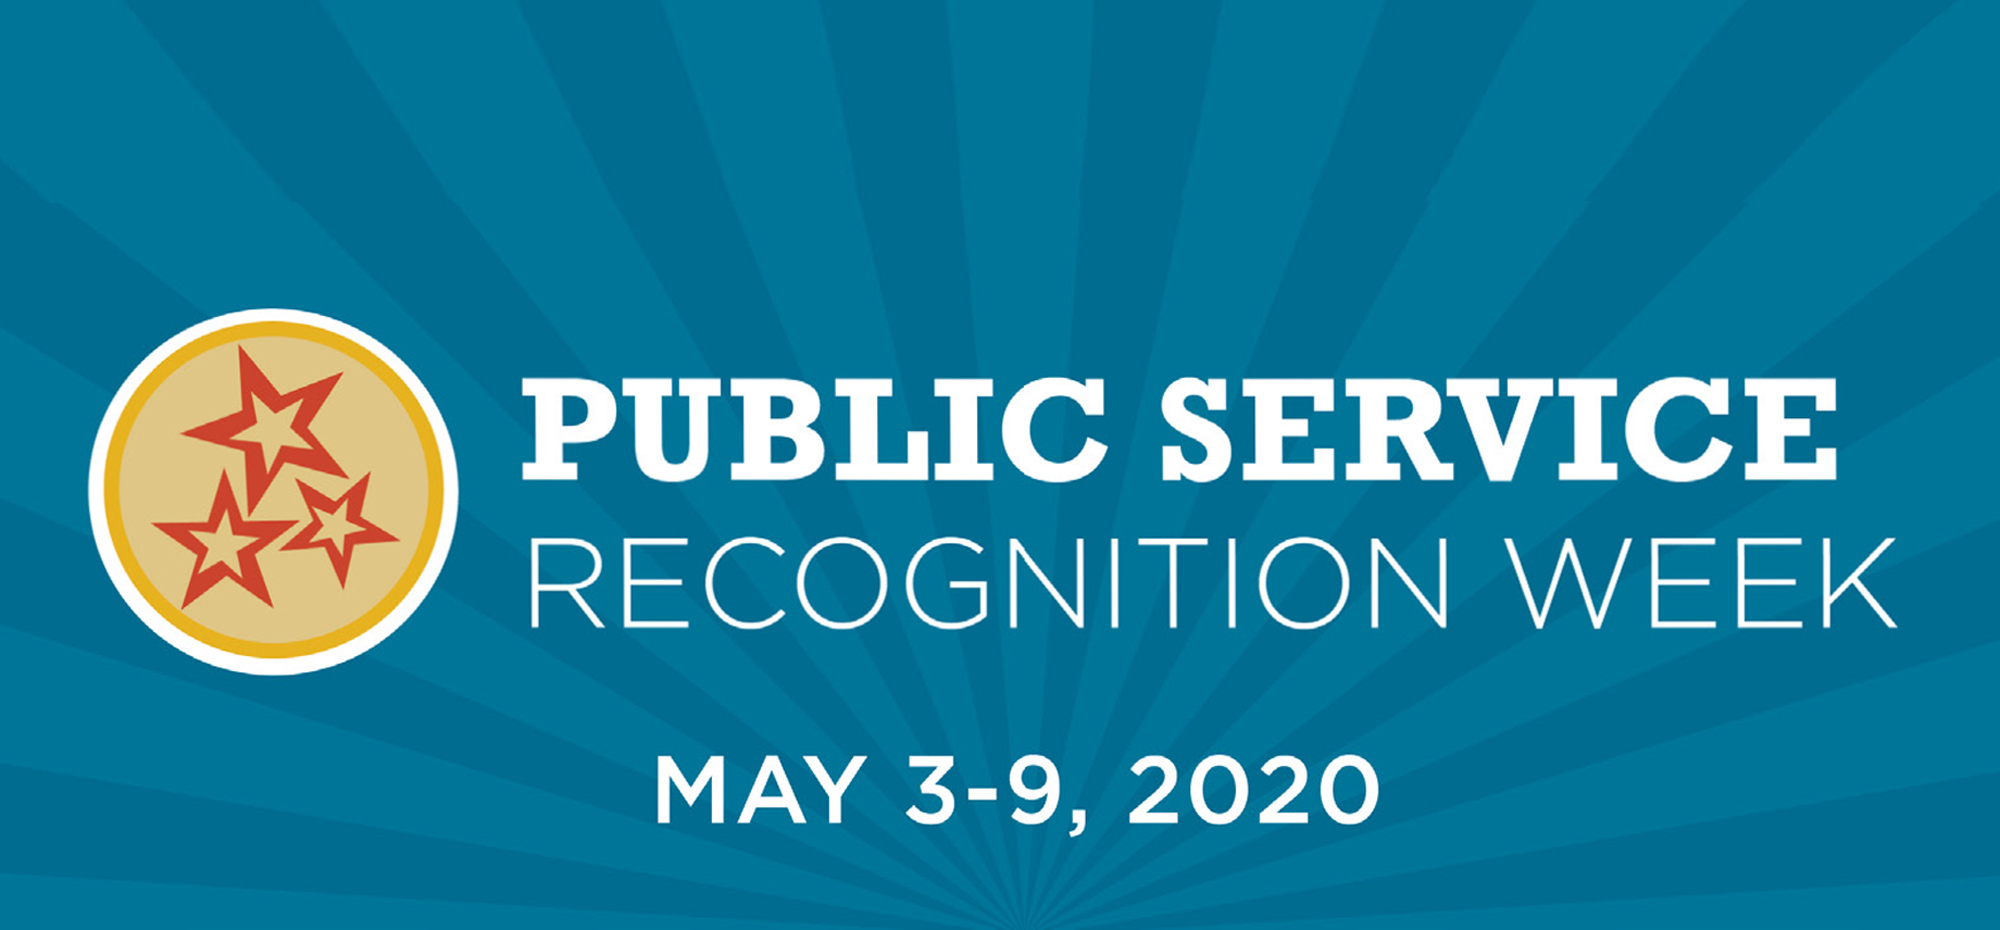 Public Service Recognition Week ICE